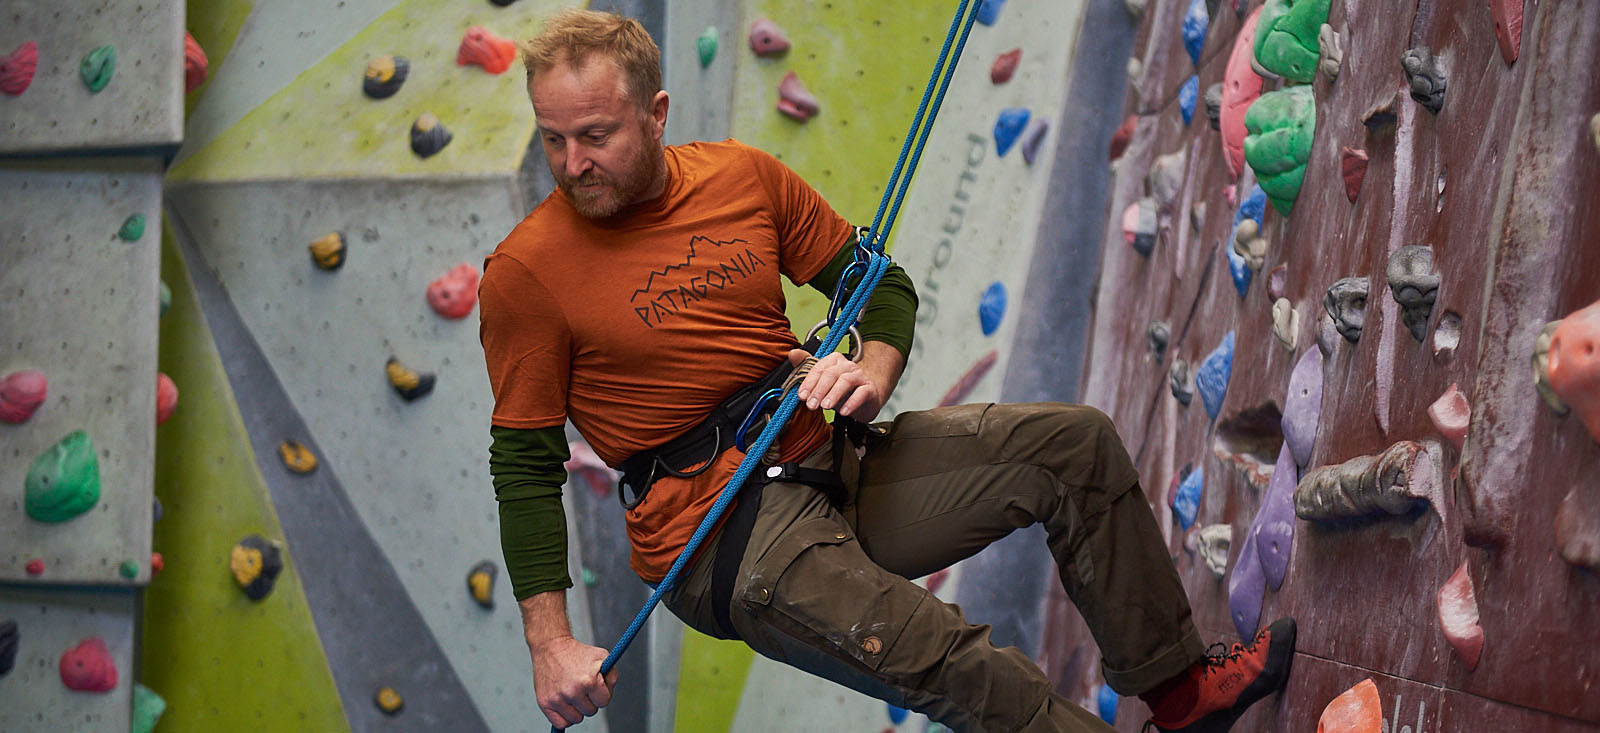 james of mountainwise abseiling on an inddor climbing wall